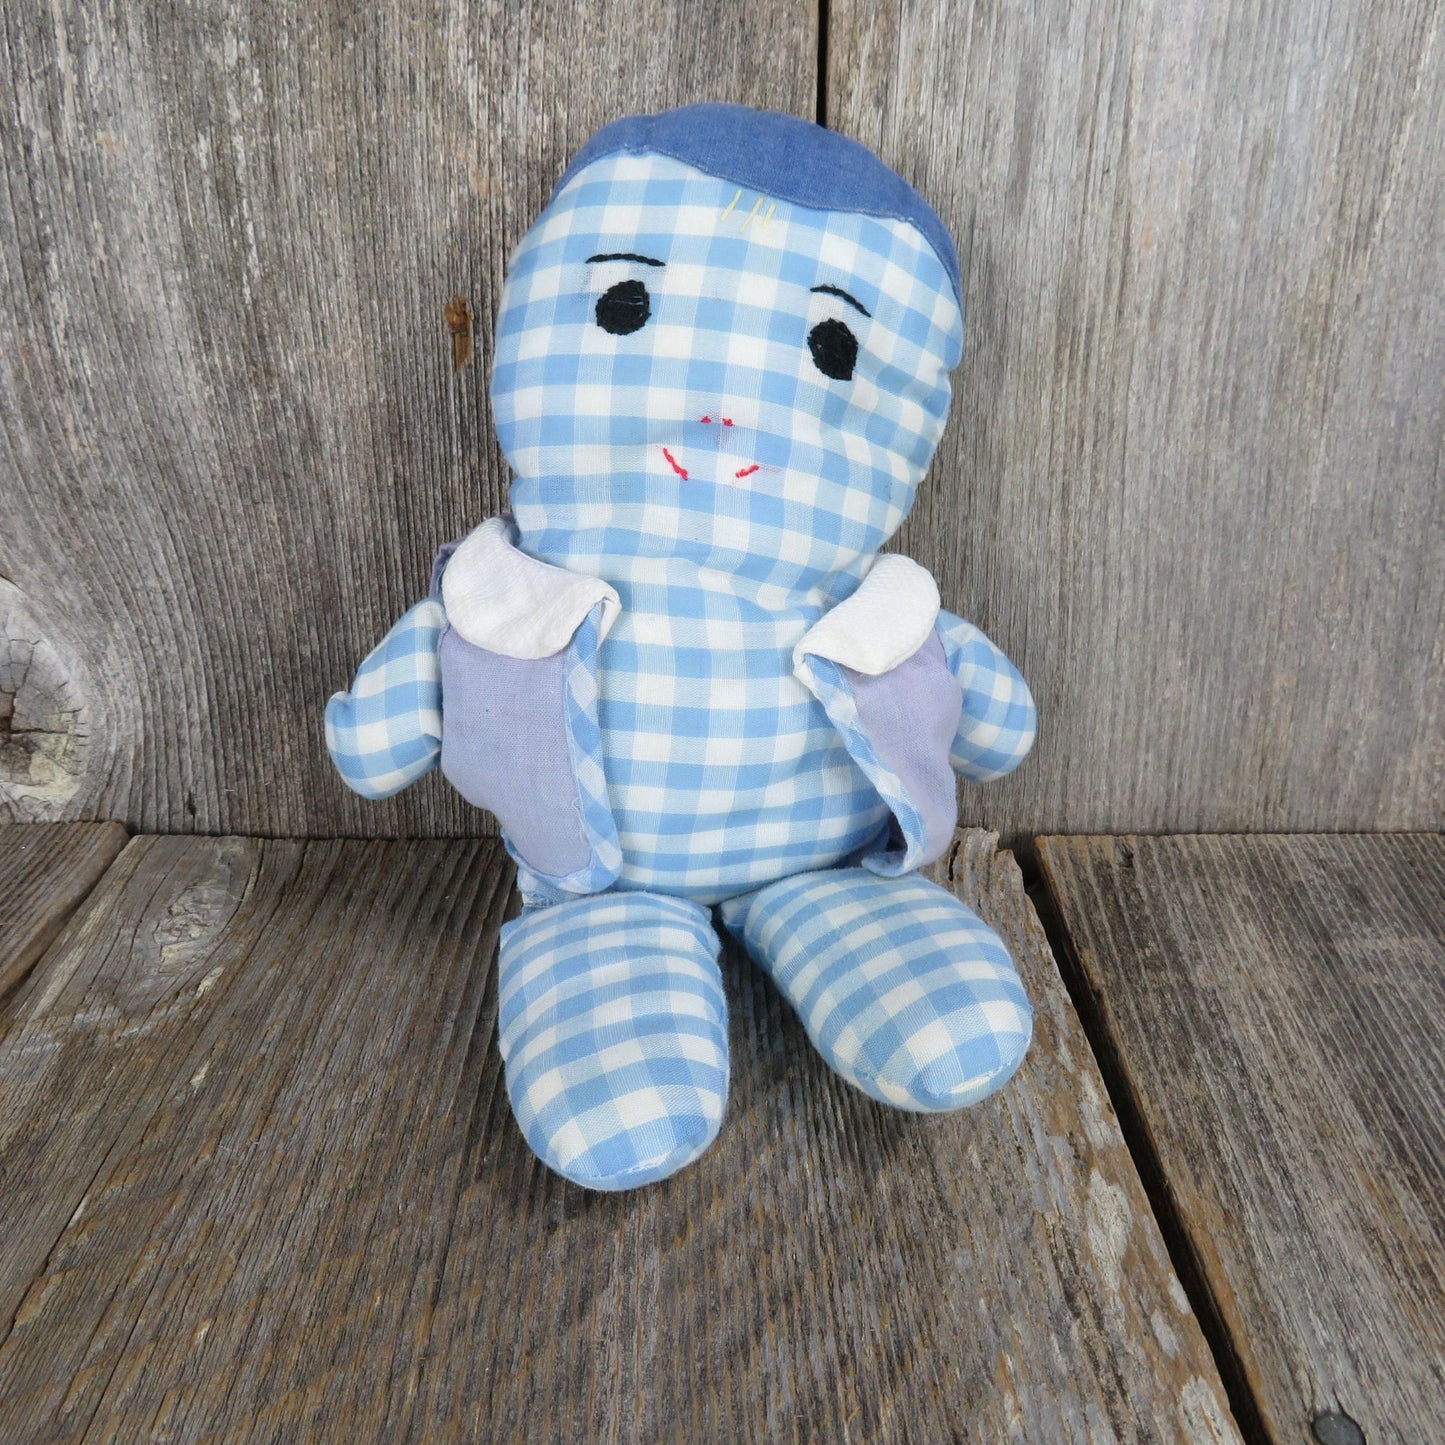 Blue and White Gingham Rag Doll Checkered Fabric Stitched Face Vest Vintage Boy Soft Body